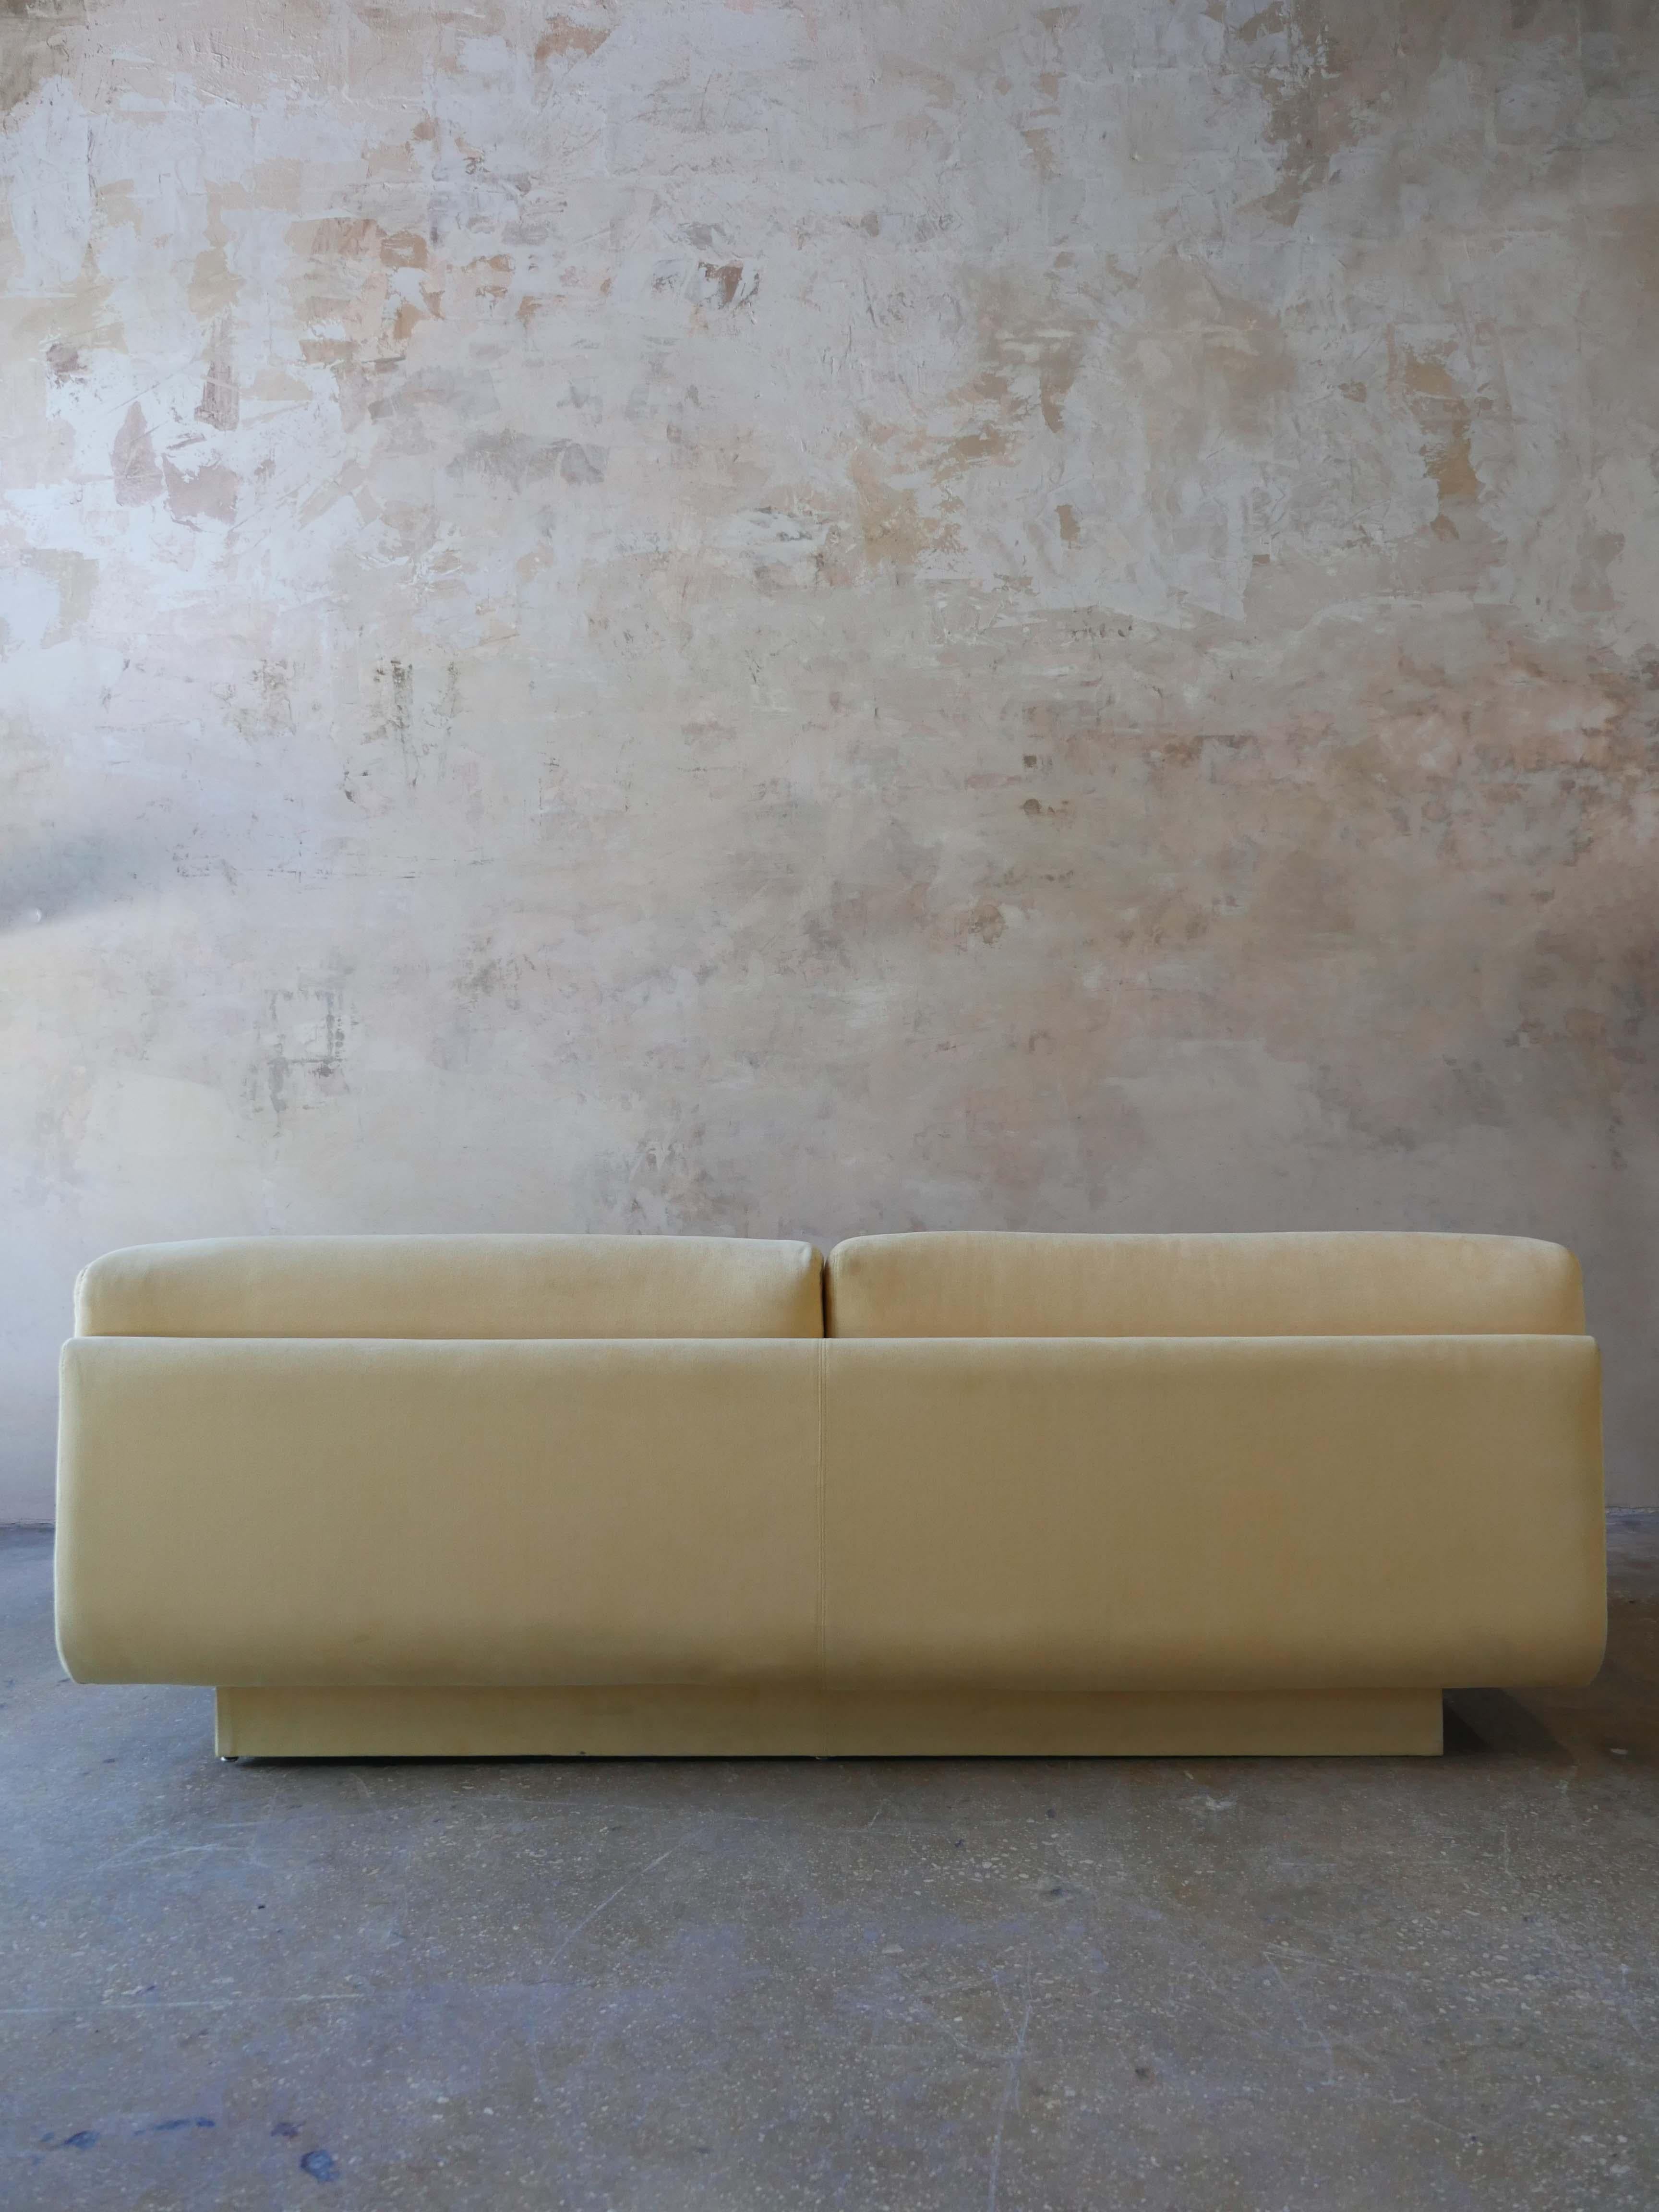 1980s postmodern, suede yellow sofa by Preview. The sofa has a beautiful sculptural silhouette that fits well in a modern, or vintage setting.